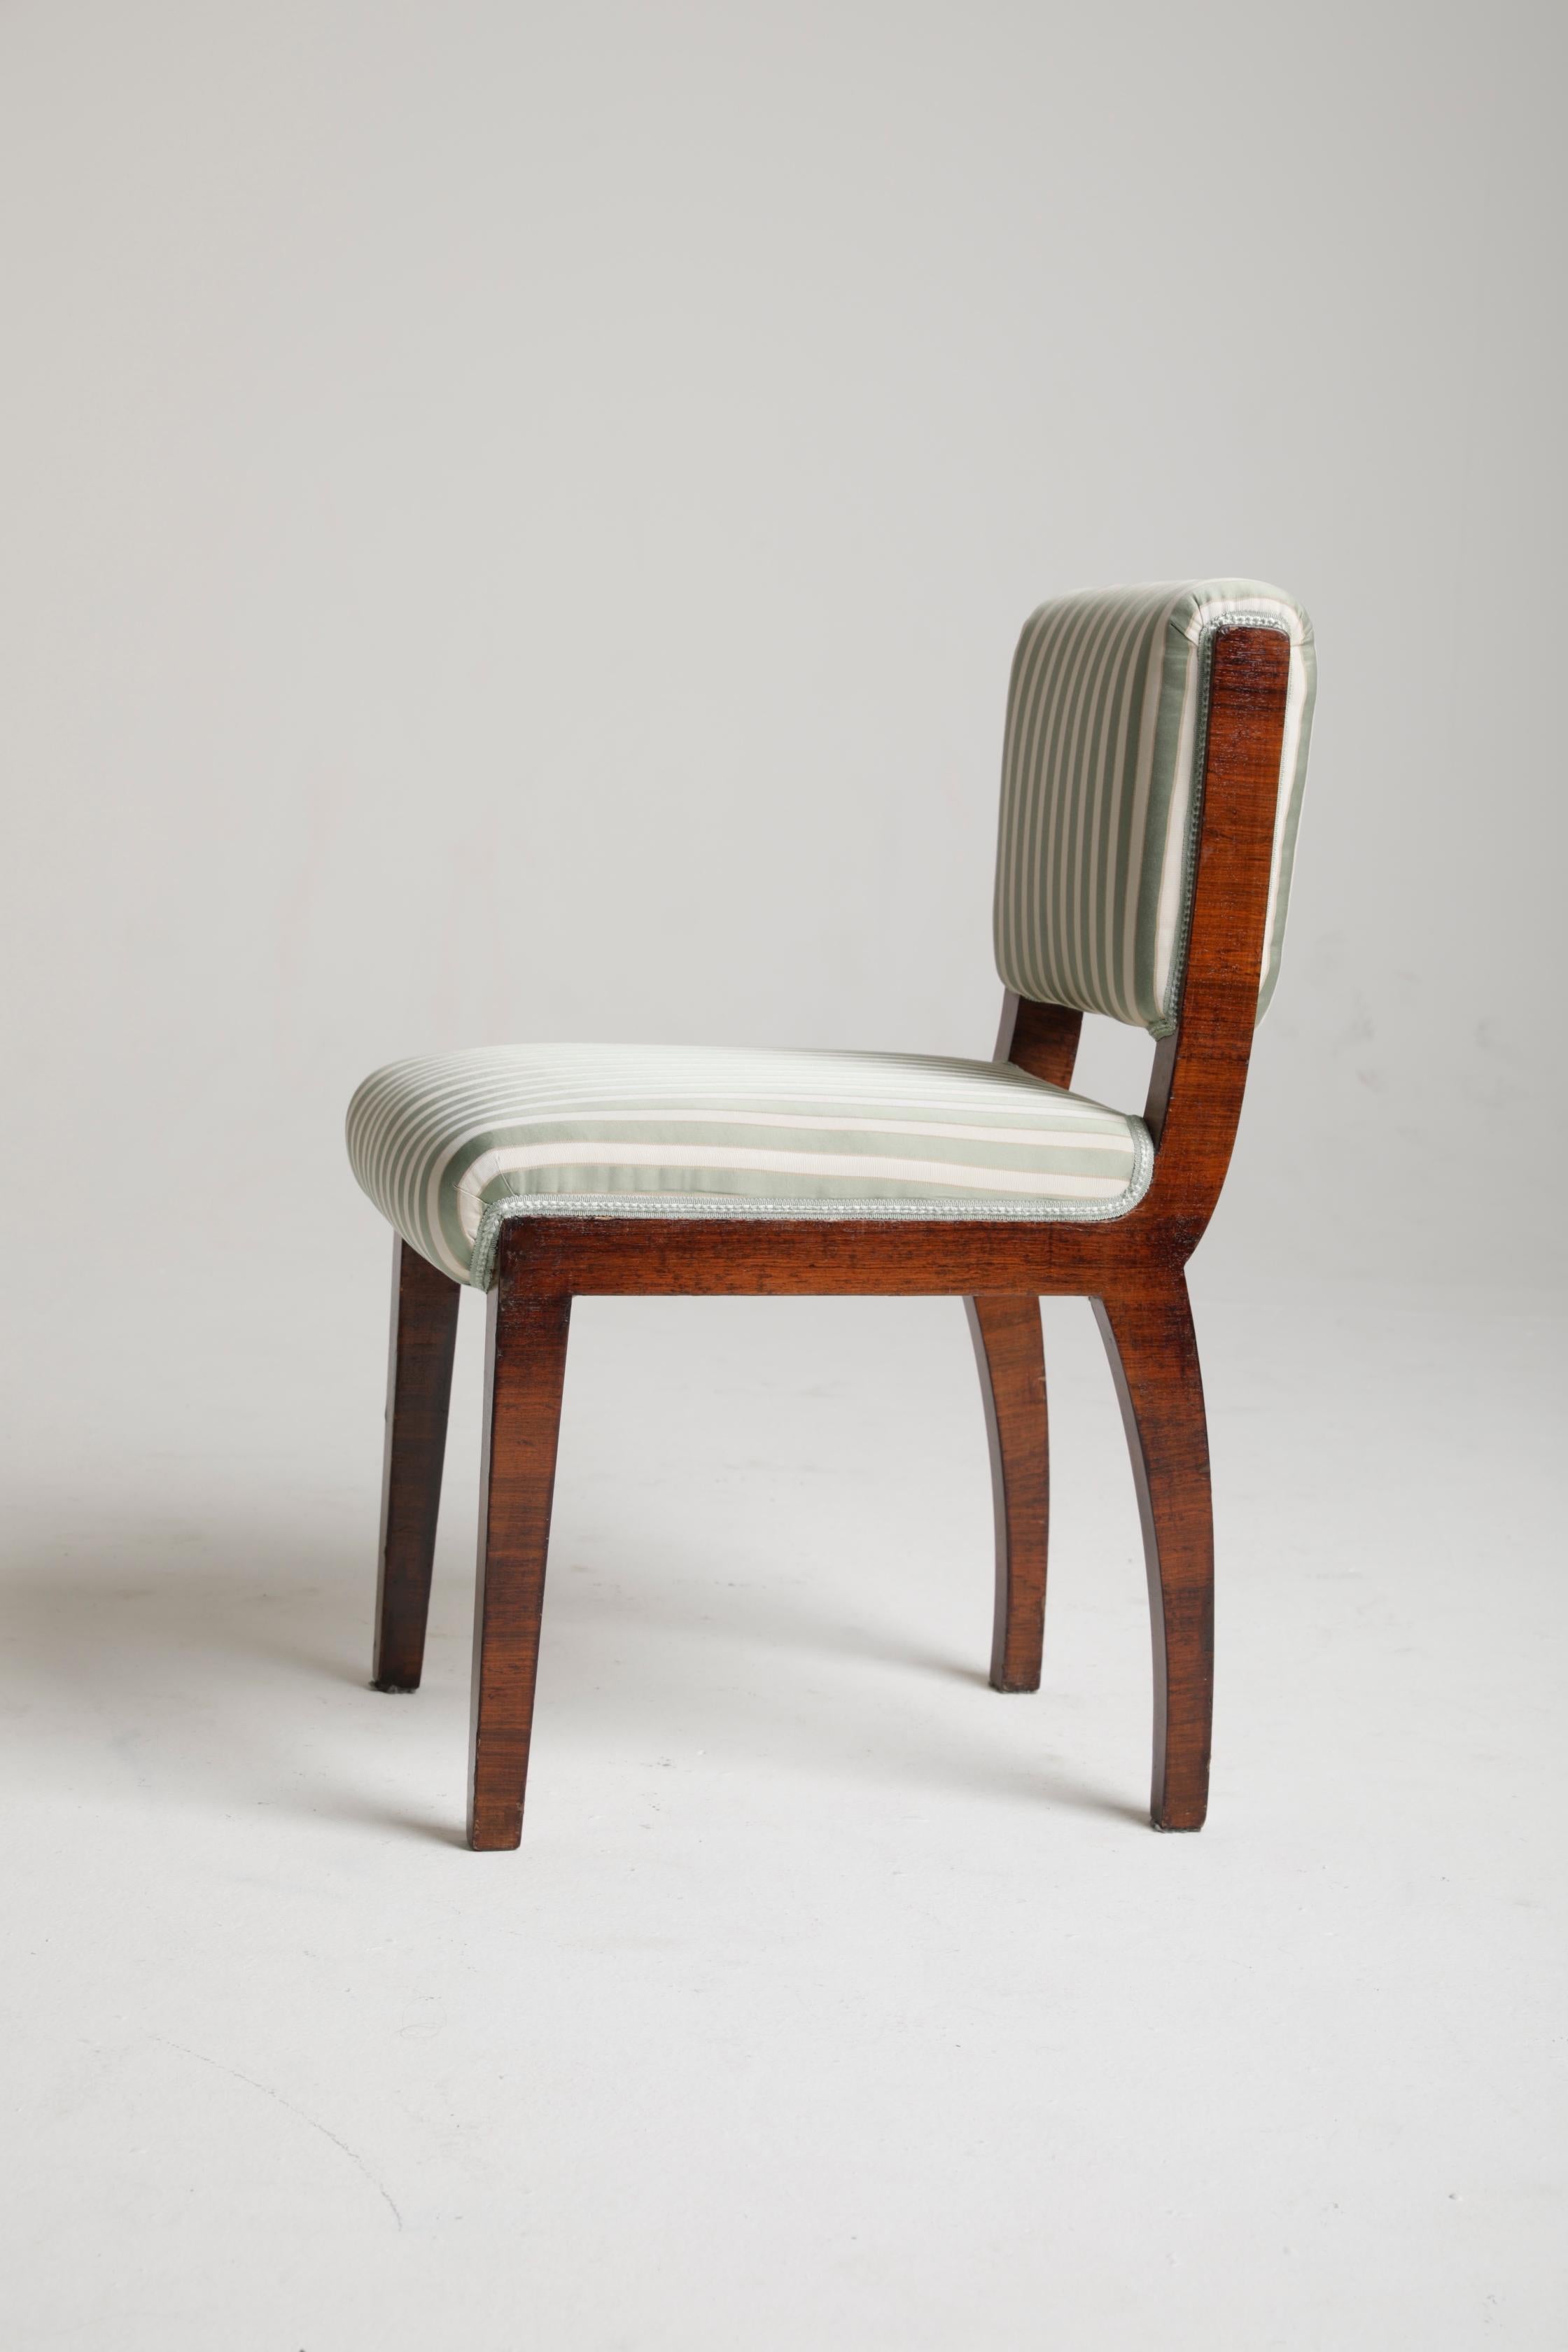 Mid-20th Century Set of 4 Italian Art Déco Chairs, Melchiorre Bega (Attr.), Italy, 1930s For Sale